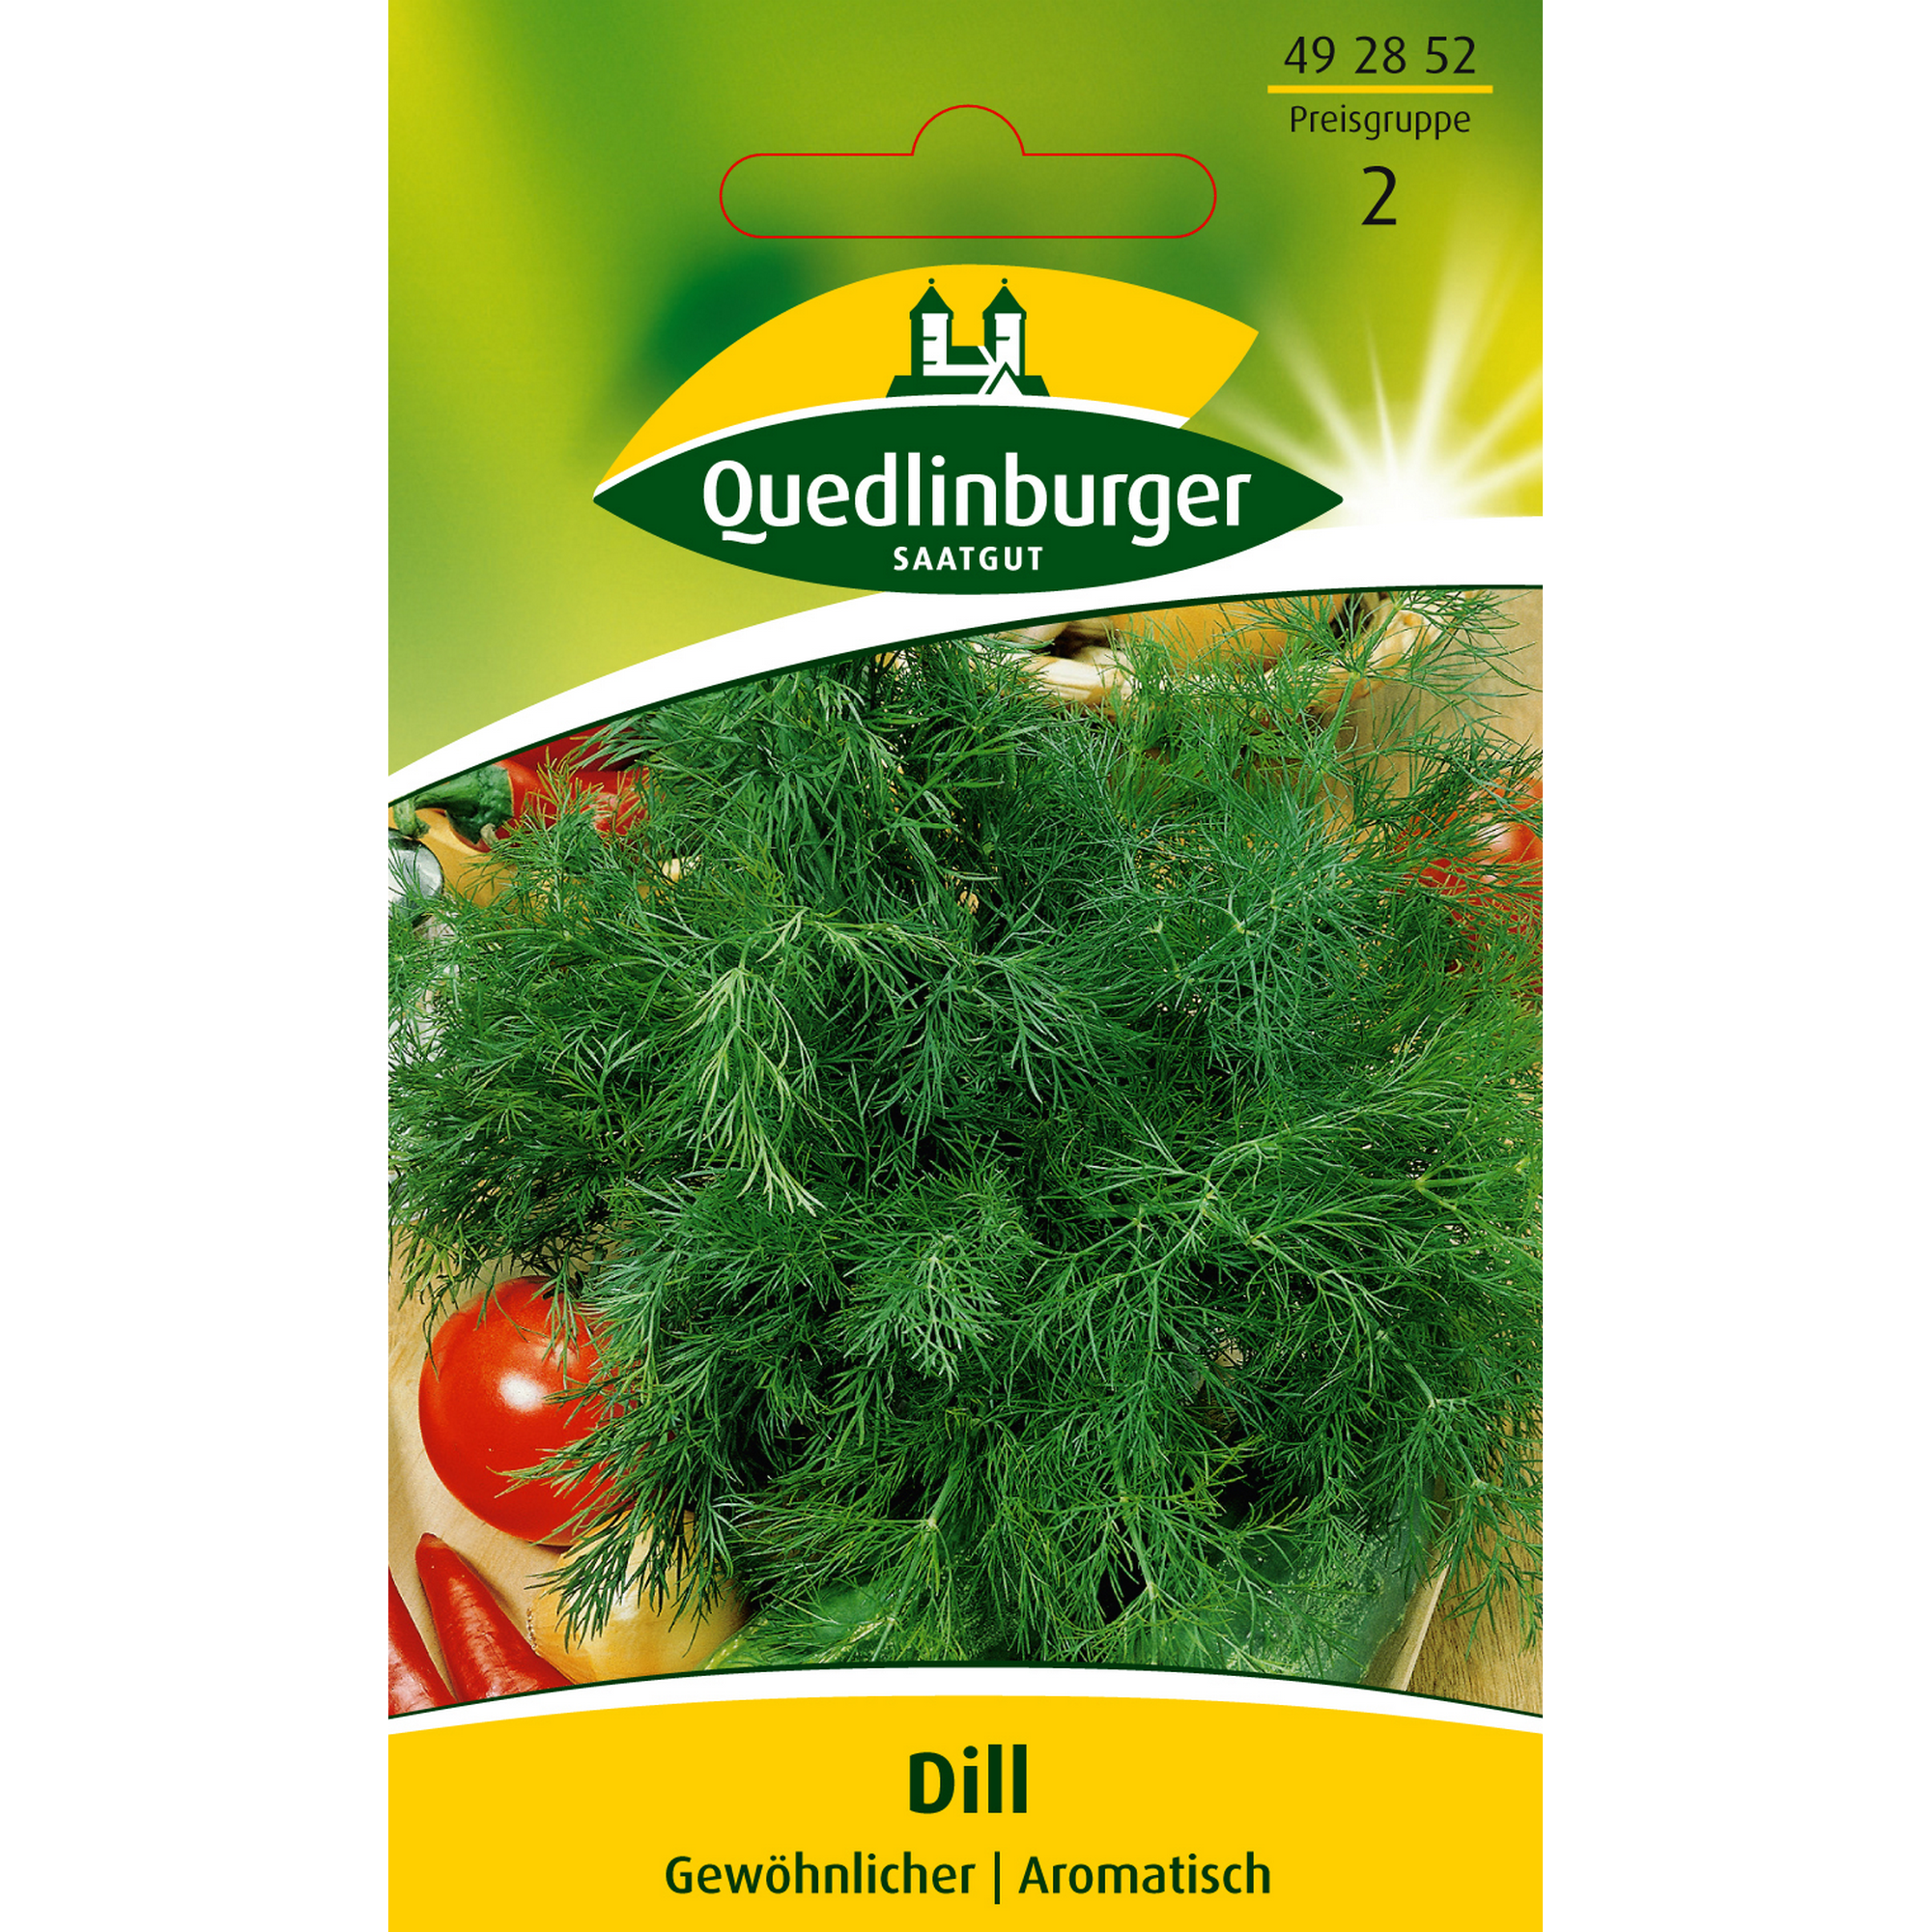 Gewöhnlicher Dill + product picture